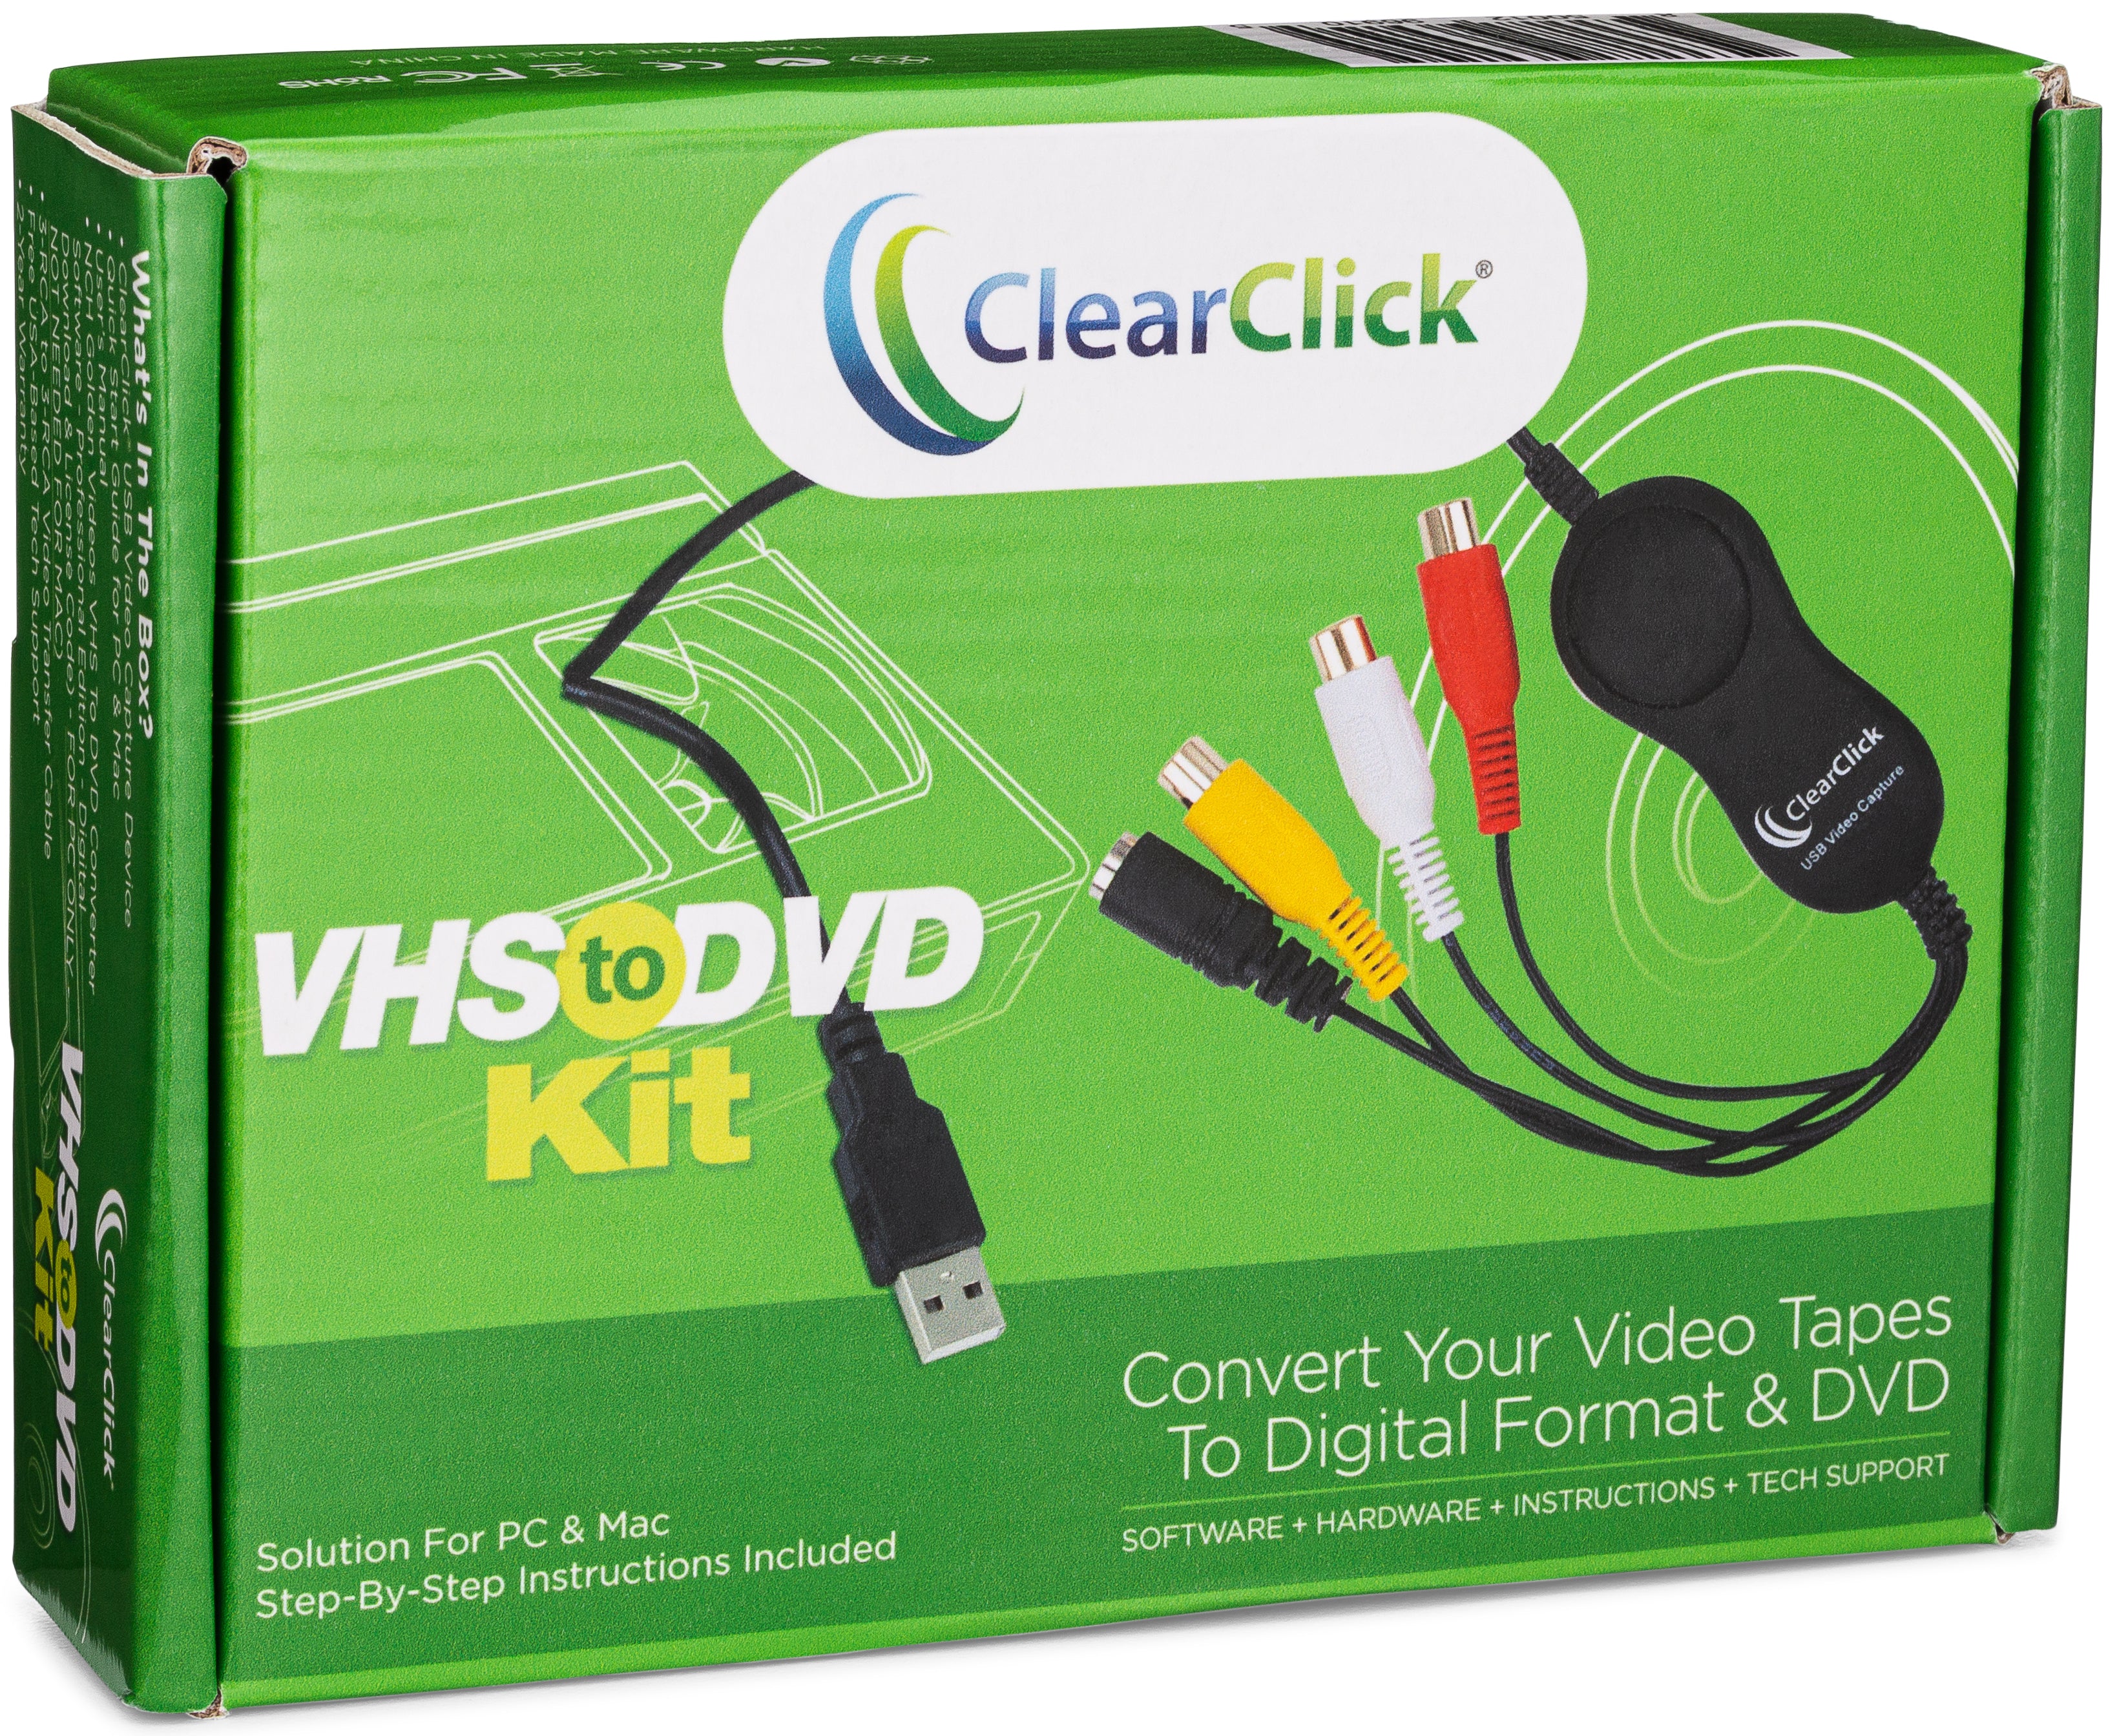 Todos los años demandante Malentendido VHS to DVD Kit For PC & Mac | Convert Any Video Tape To Digital Format –  ClearClick